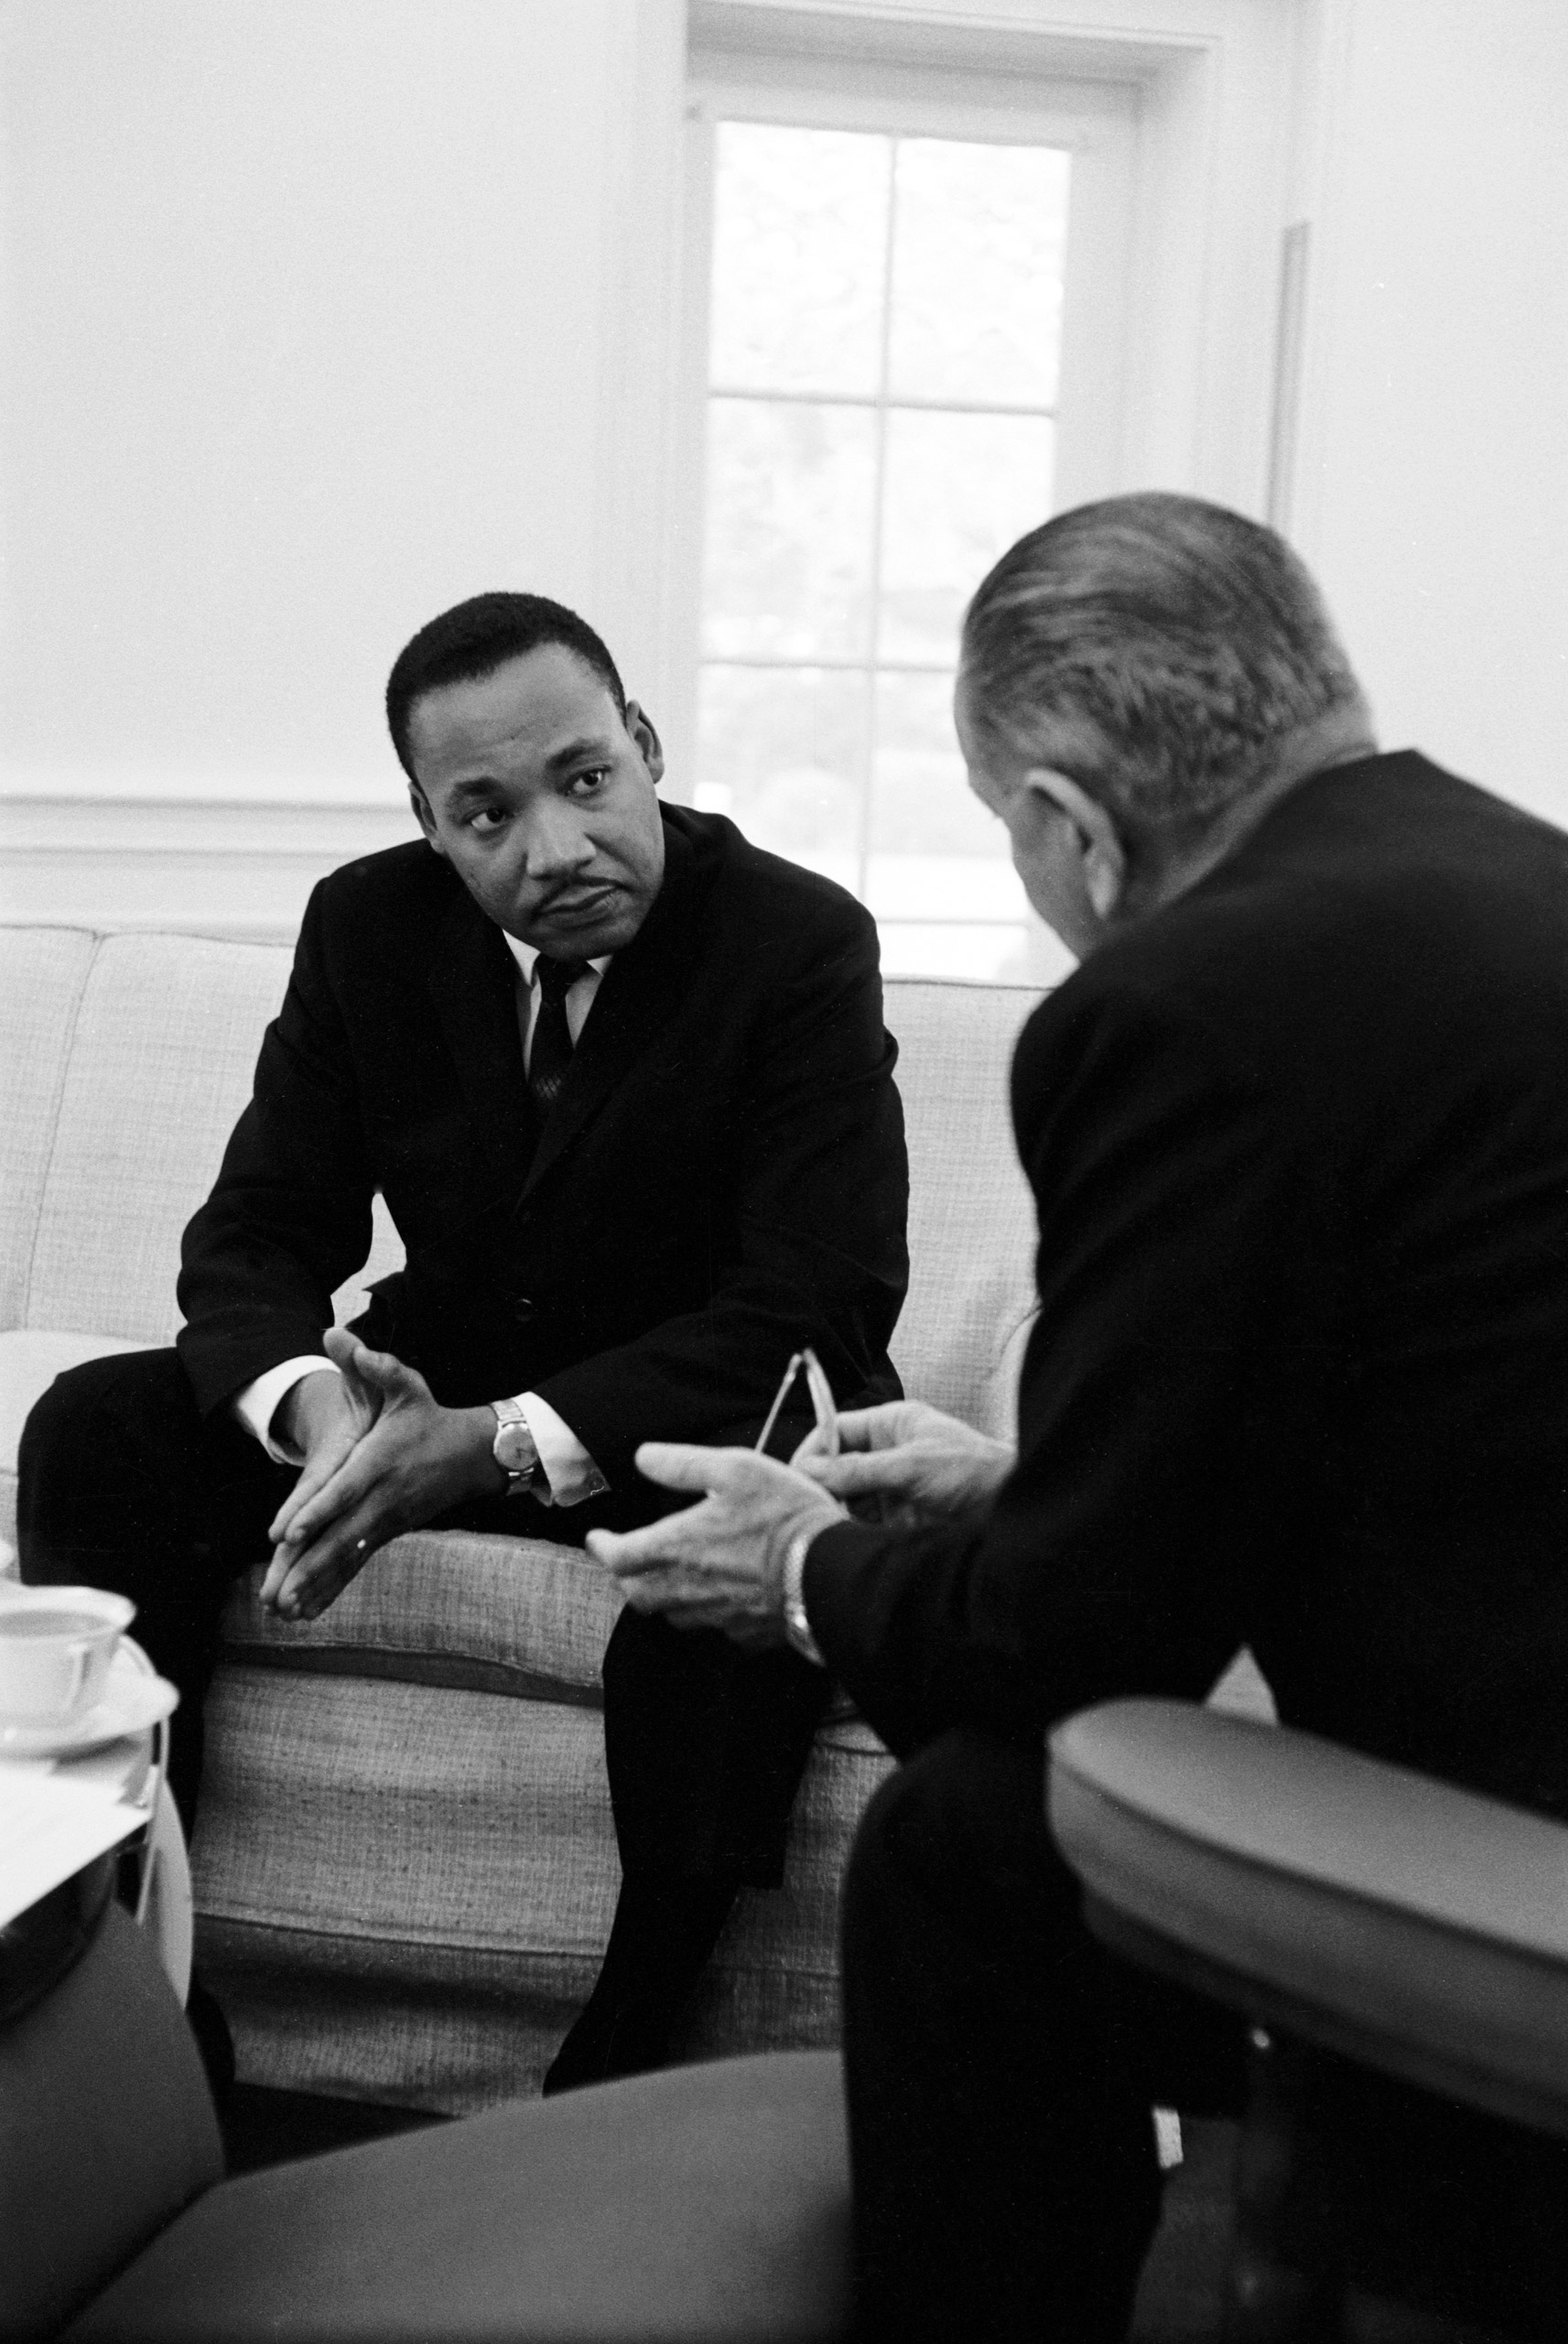 Civil rights leader Dr. Martin Luther King Jr.speaking with President Lyndon Johnson during a visit to the White House, 1963.